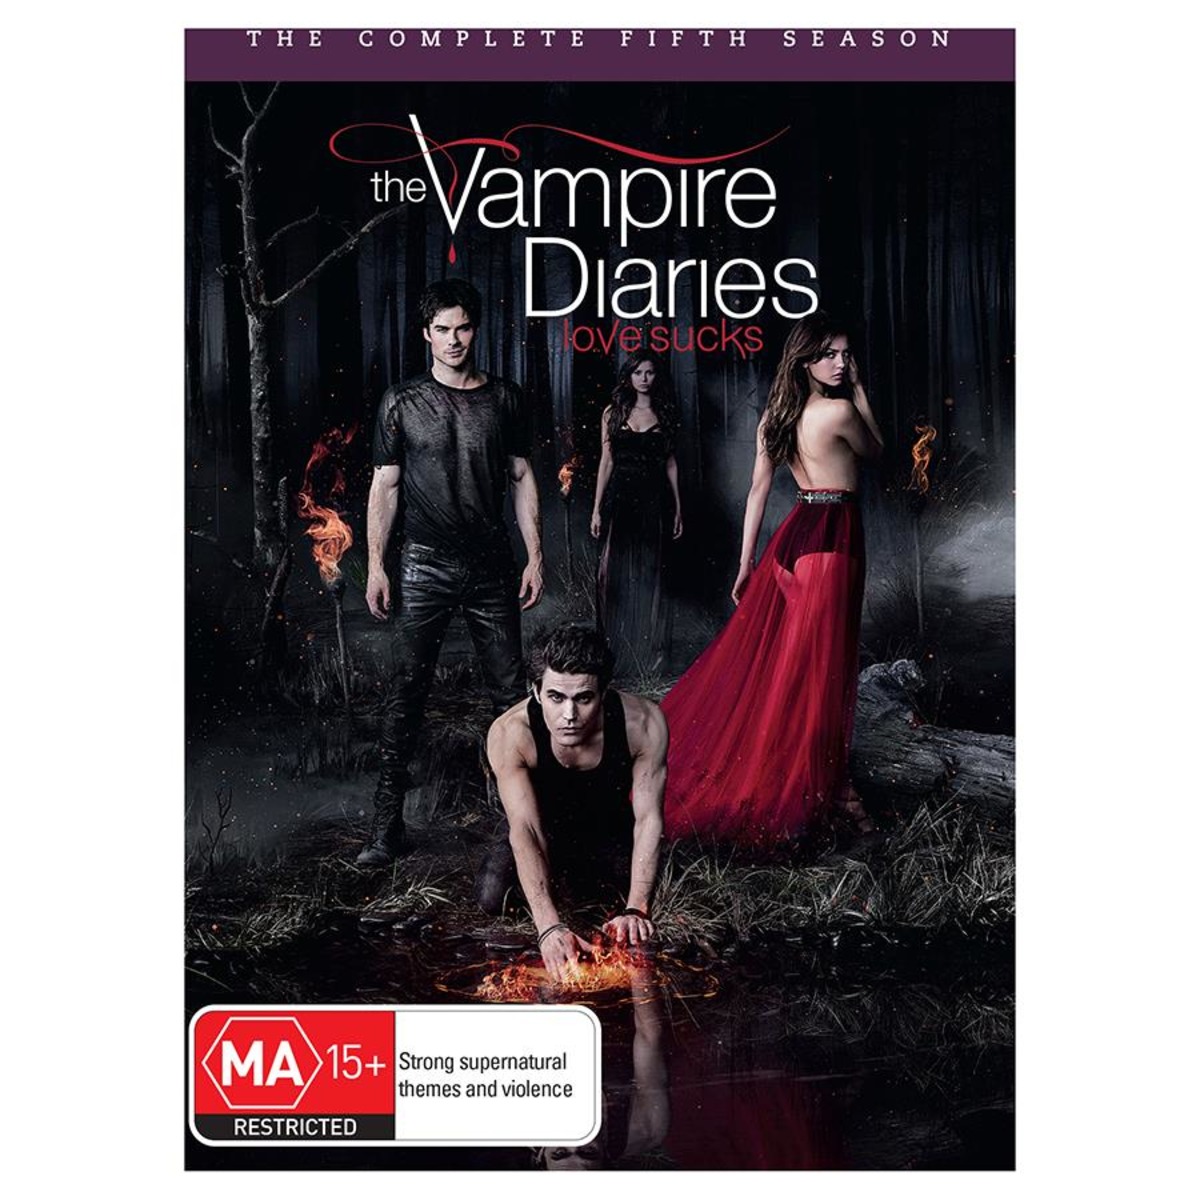 The Vampire Diaries: The Complete Fifth Season - DVD Box Set